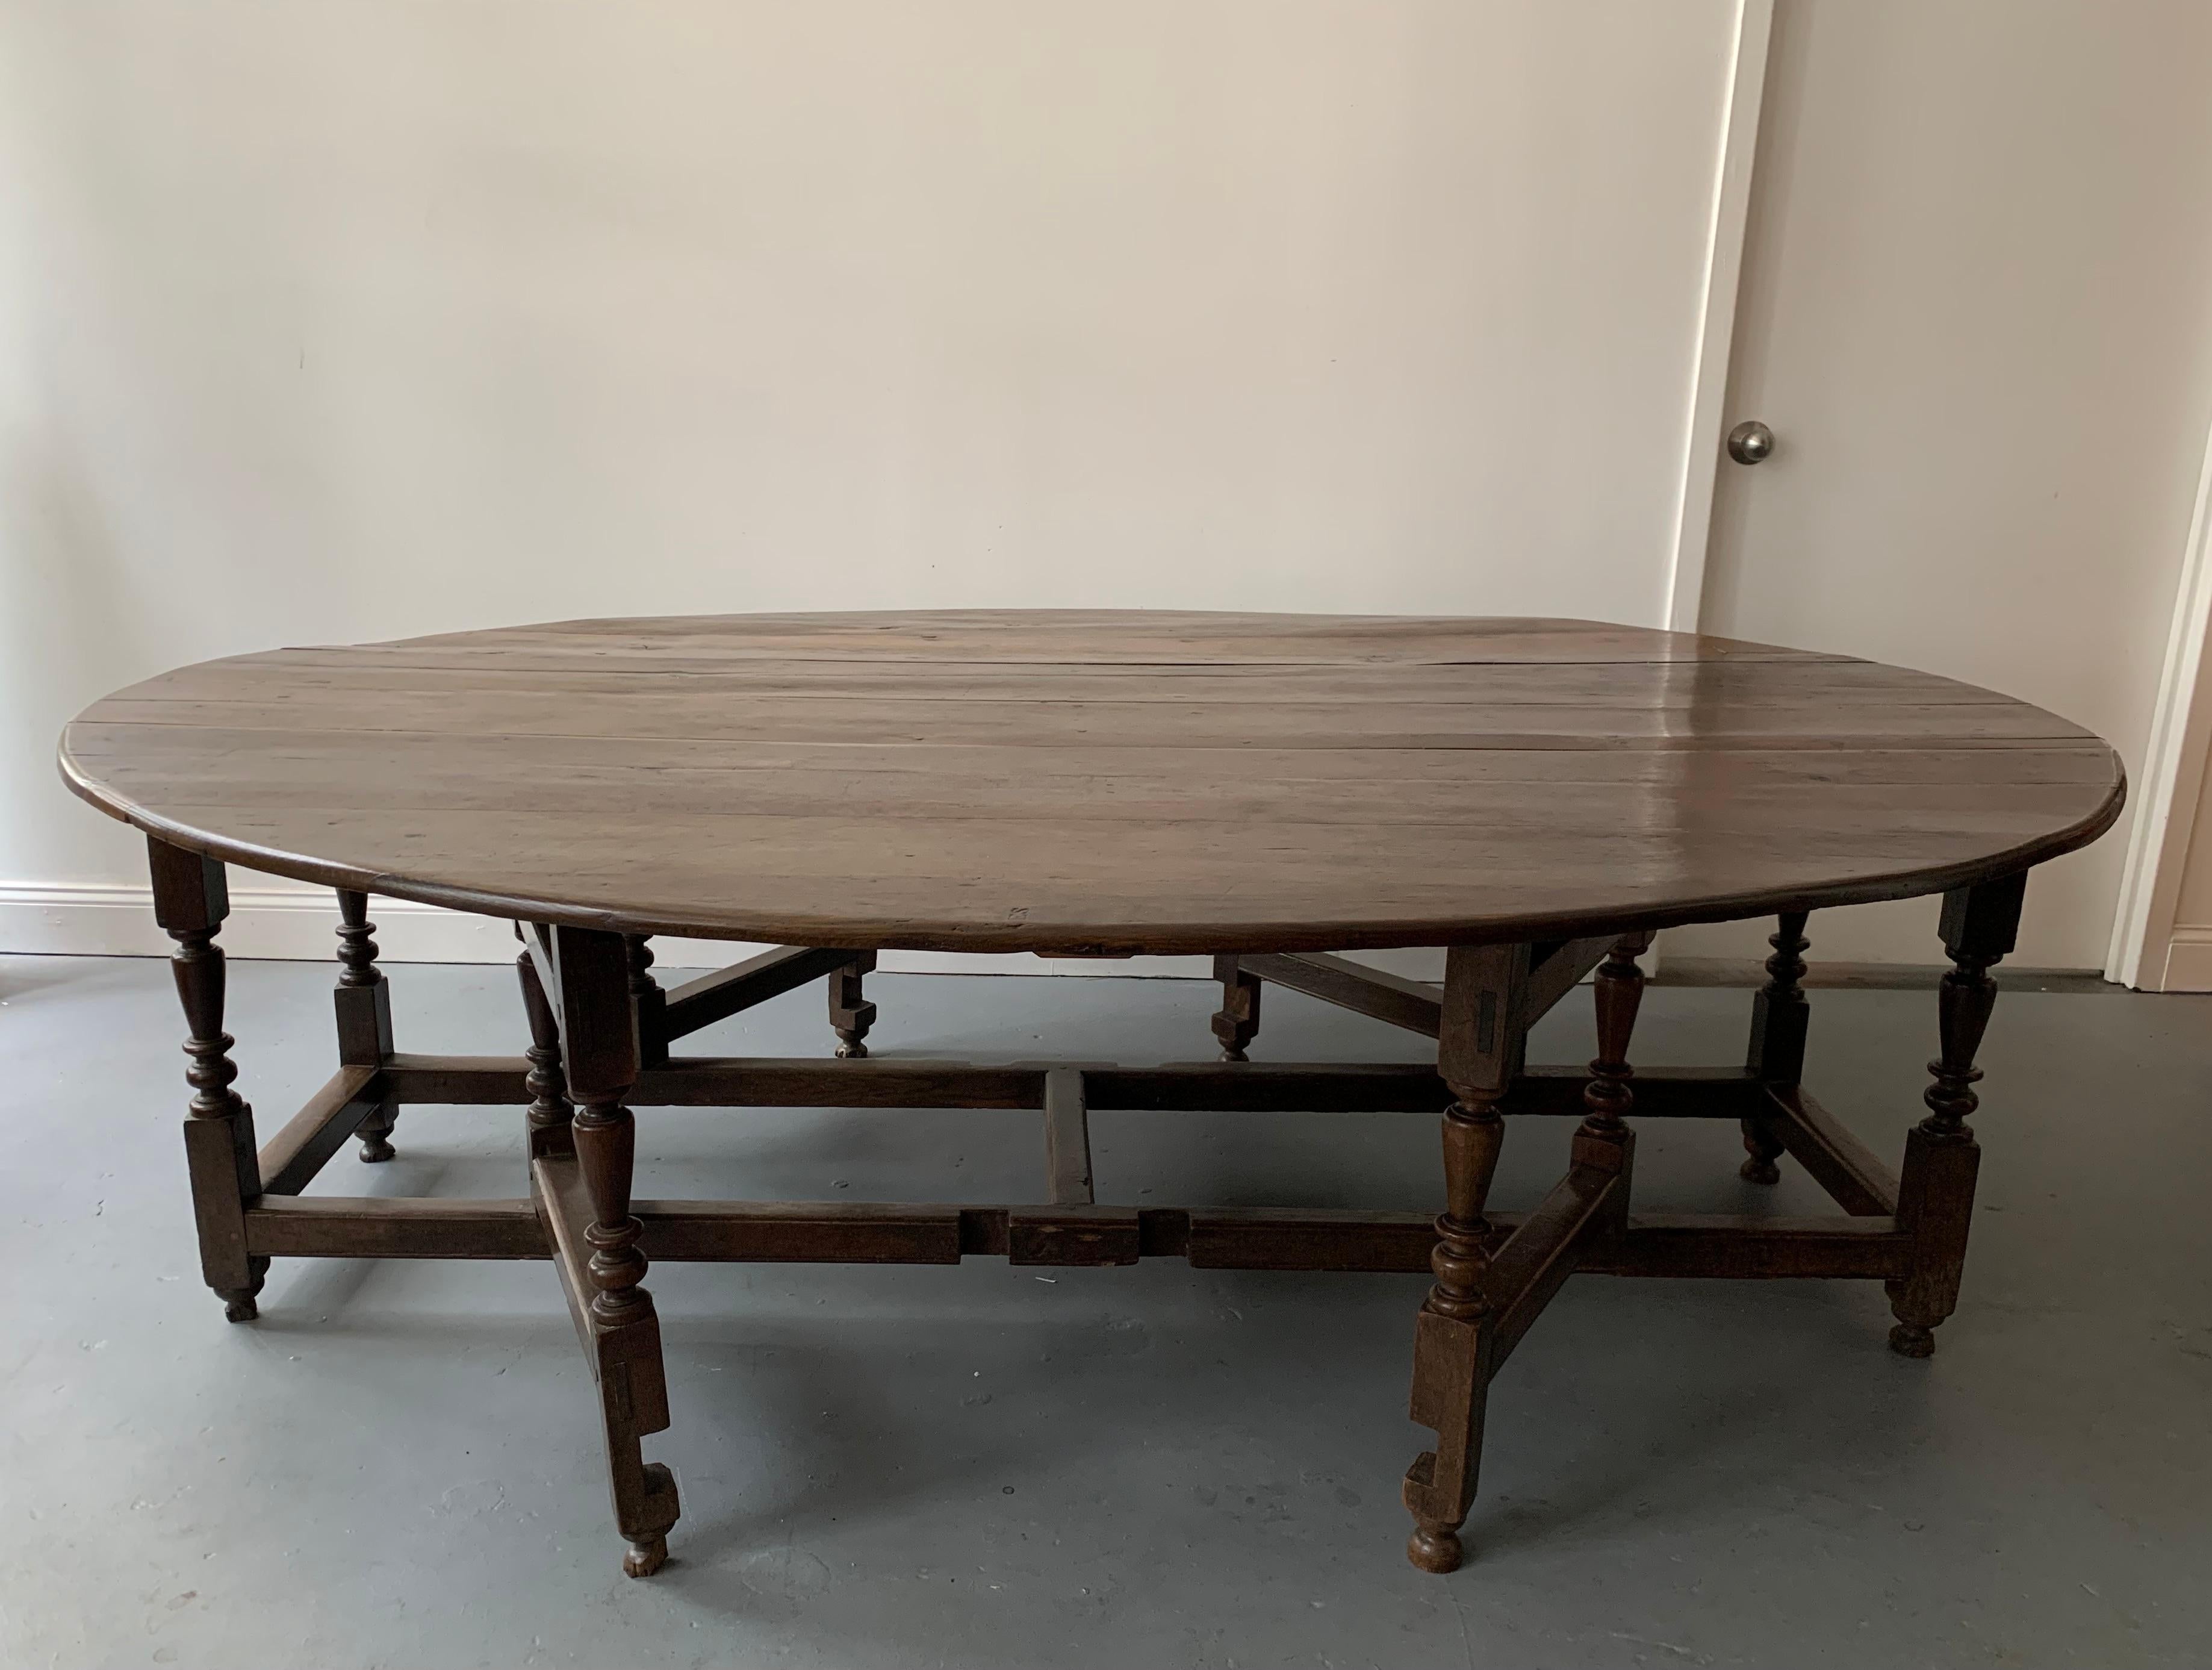 A very large dining table from 1680. The table has been restored and needs only to be re-waxed upon sale. The gate-leg table has a wonderful patina to its surface.